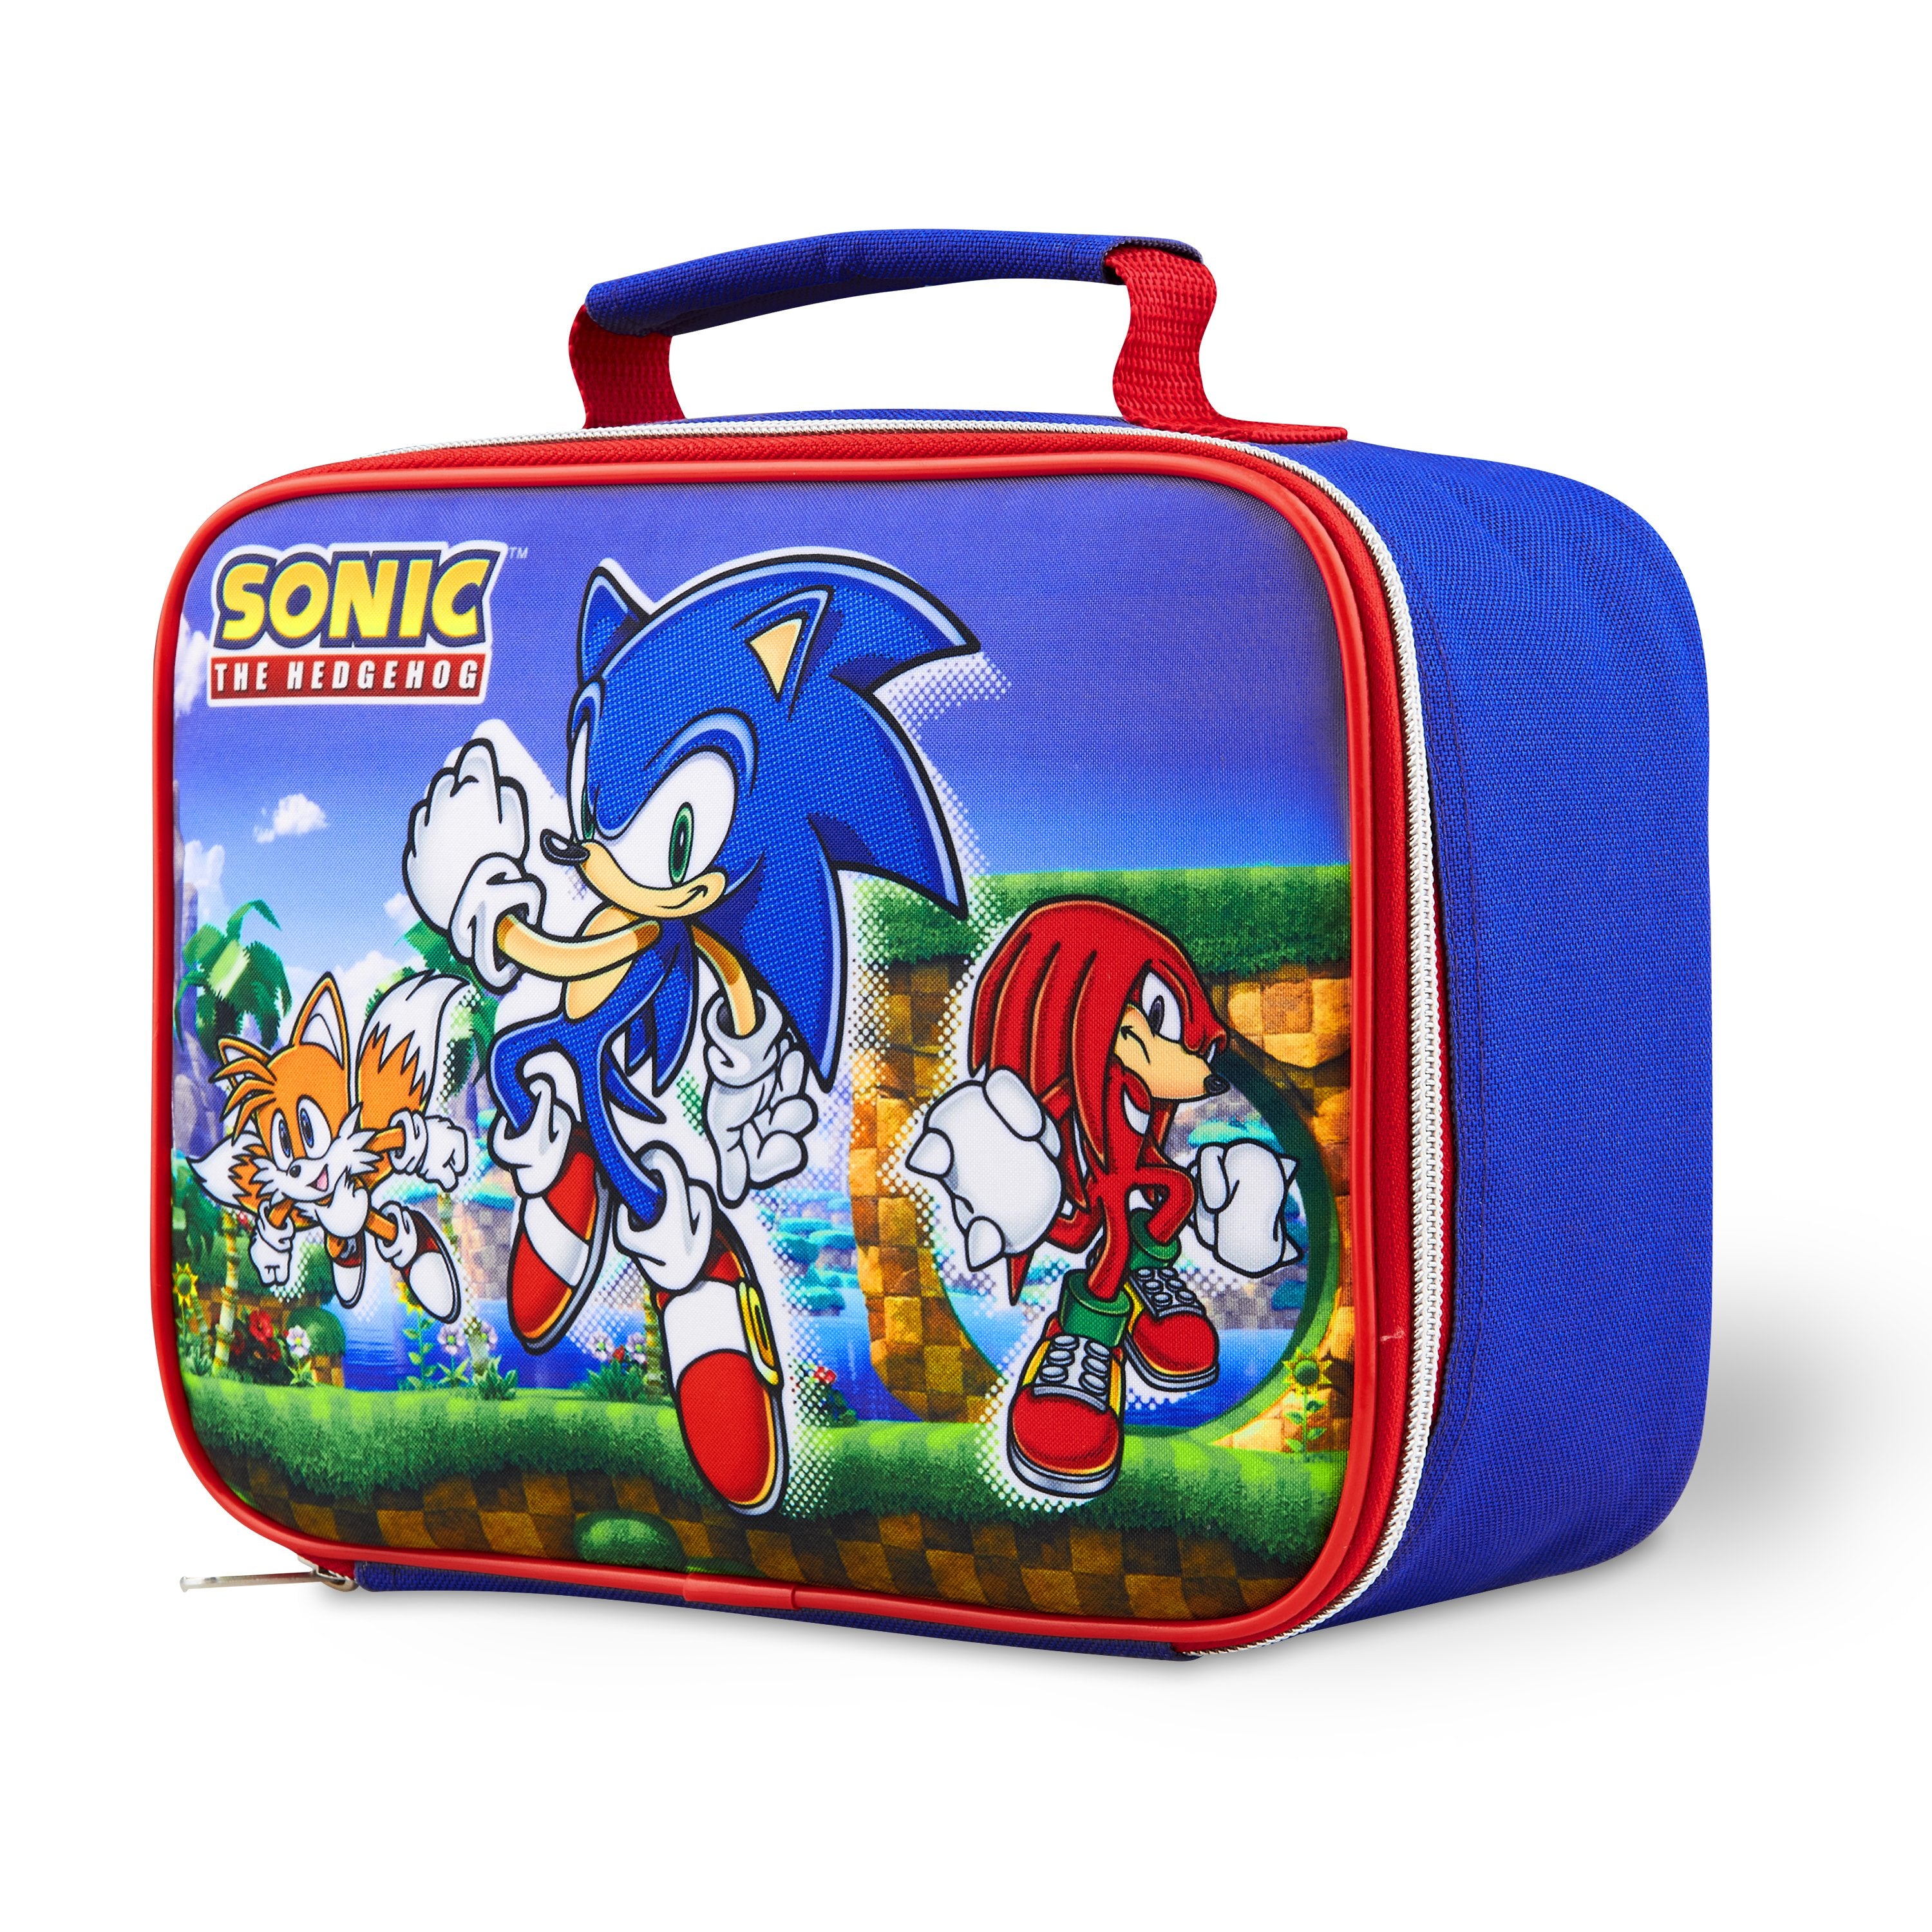 Sonic The Hedgehog Lunch Box Kickin' It Insulated Kids Lunch Bag